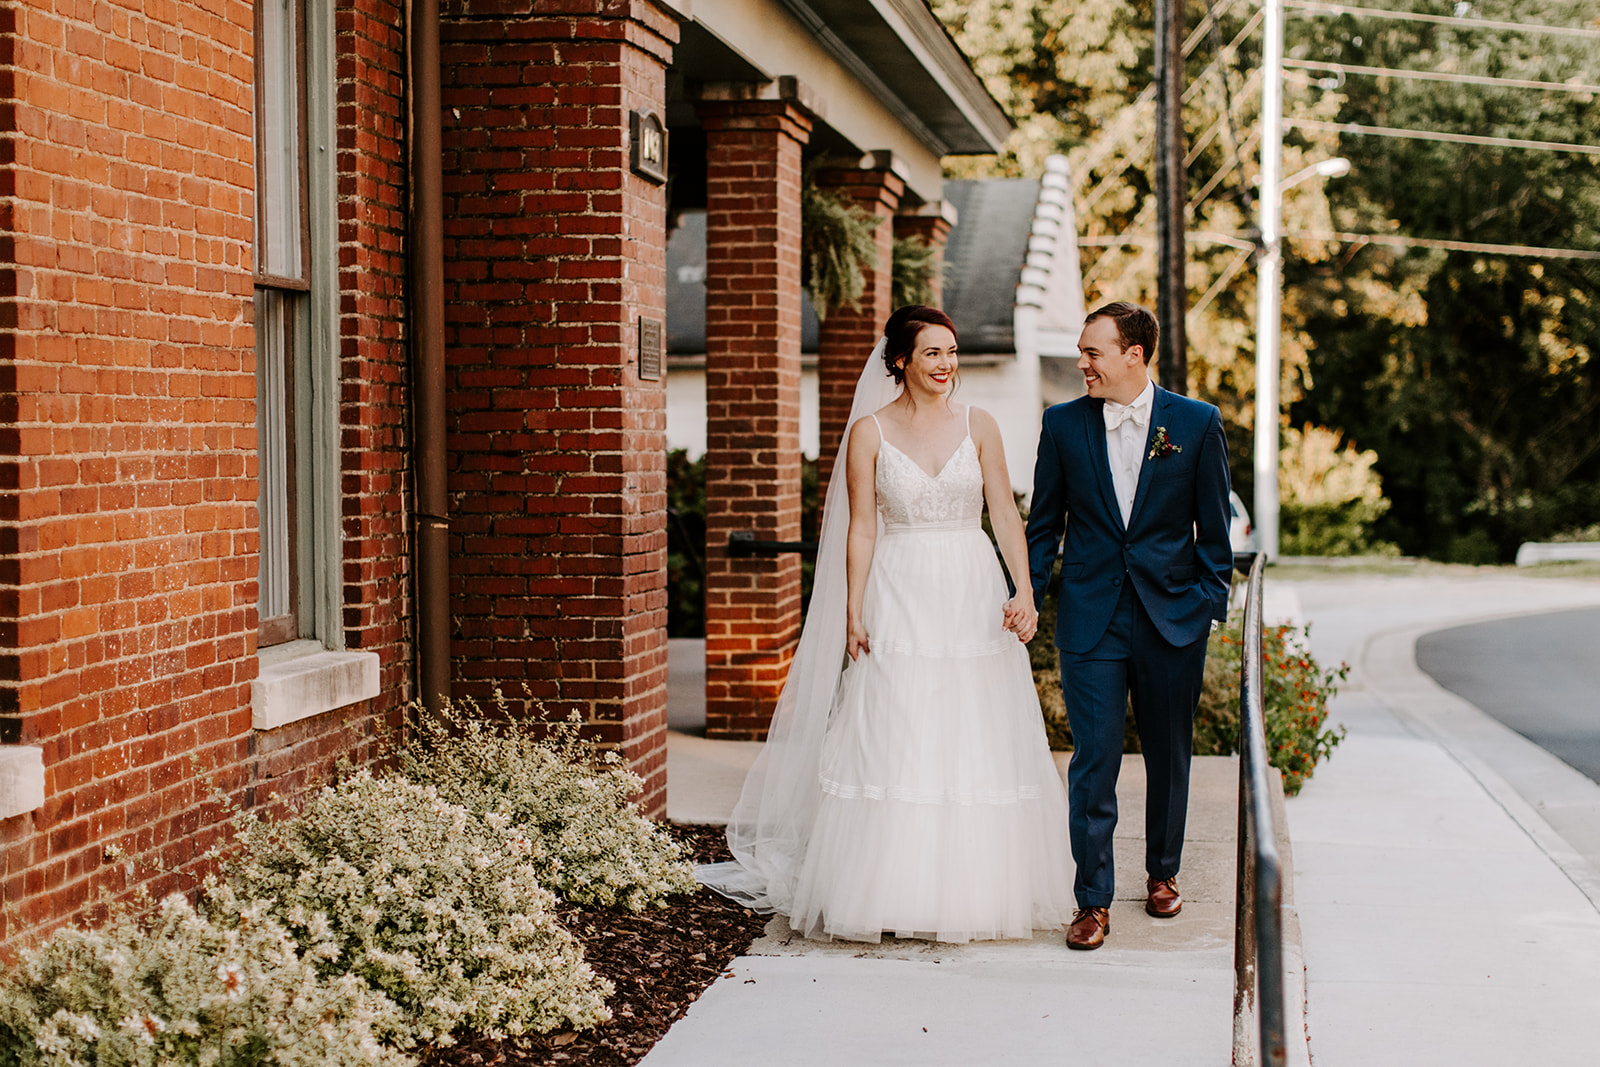 Quaint Vintage Wedding at McConnell House